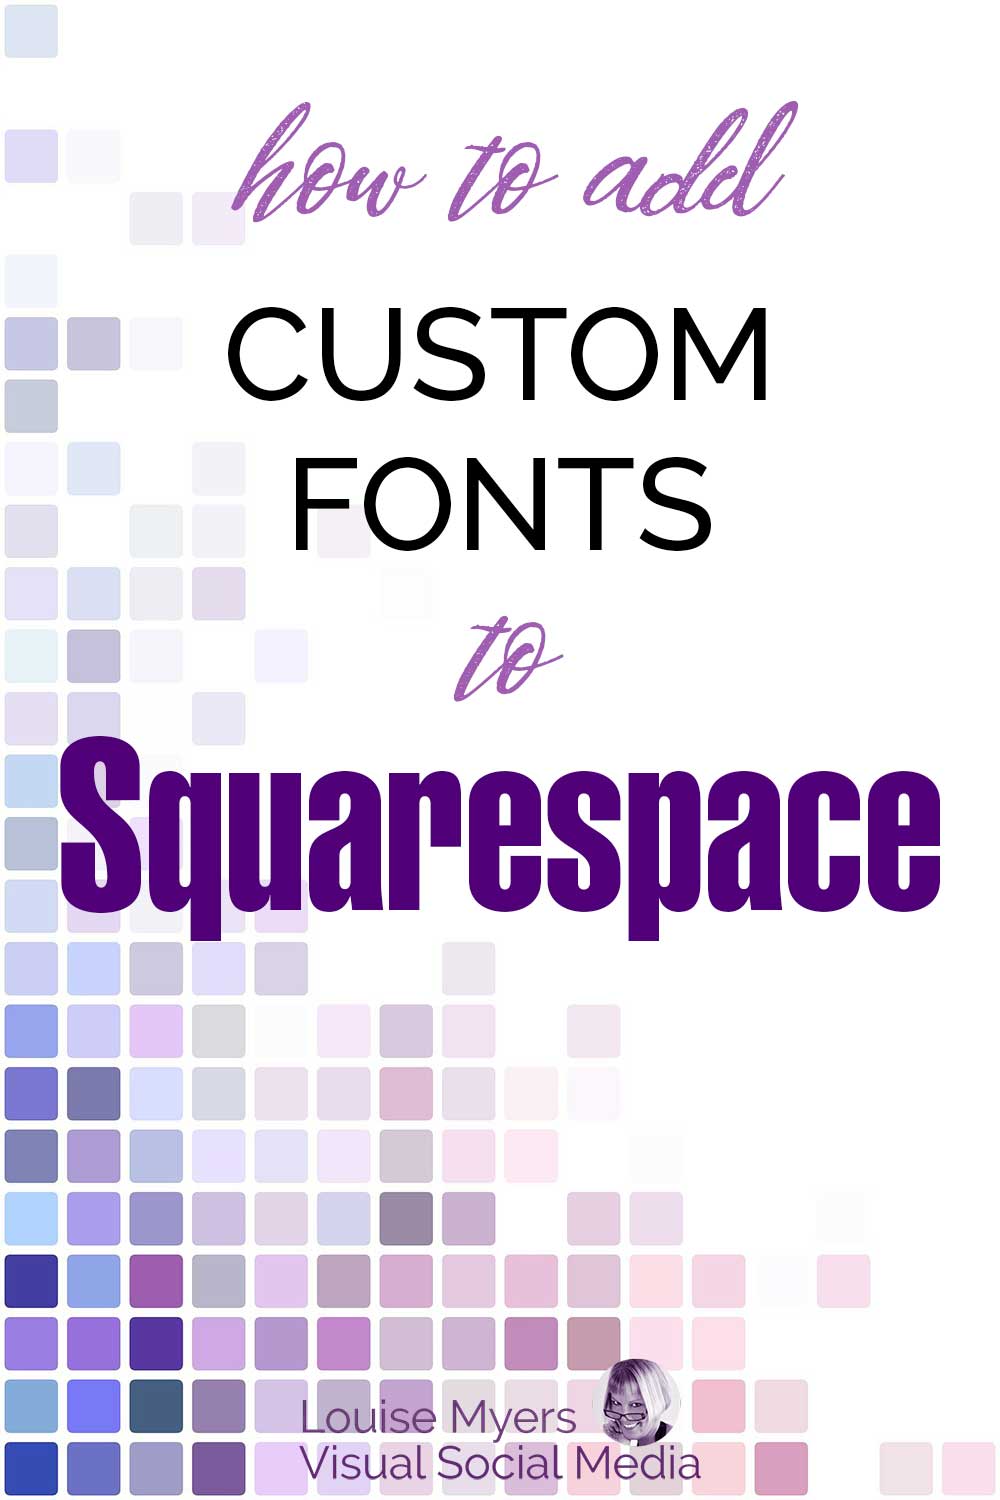 square designs in pink purple and blue says How to Add Custom Fonts to Squarespace.